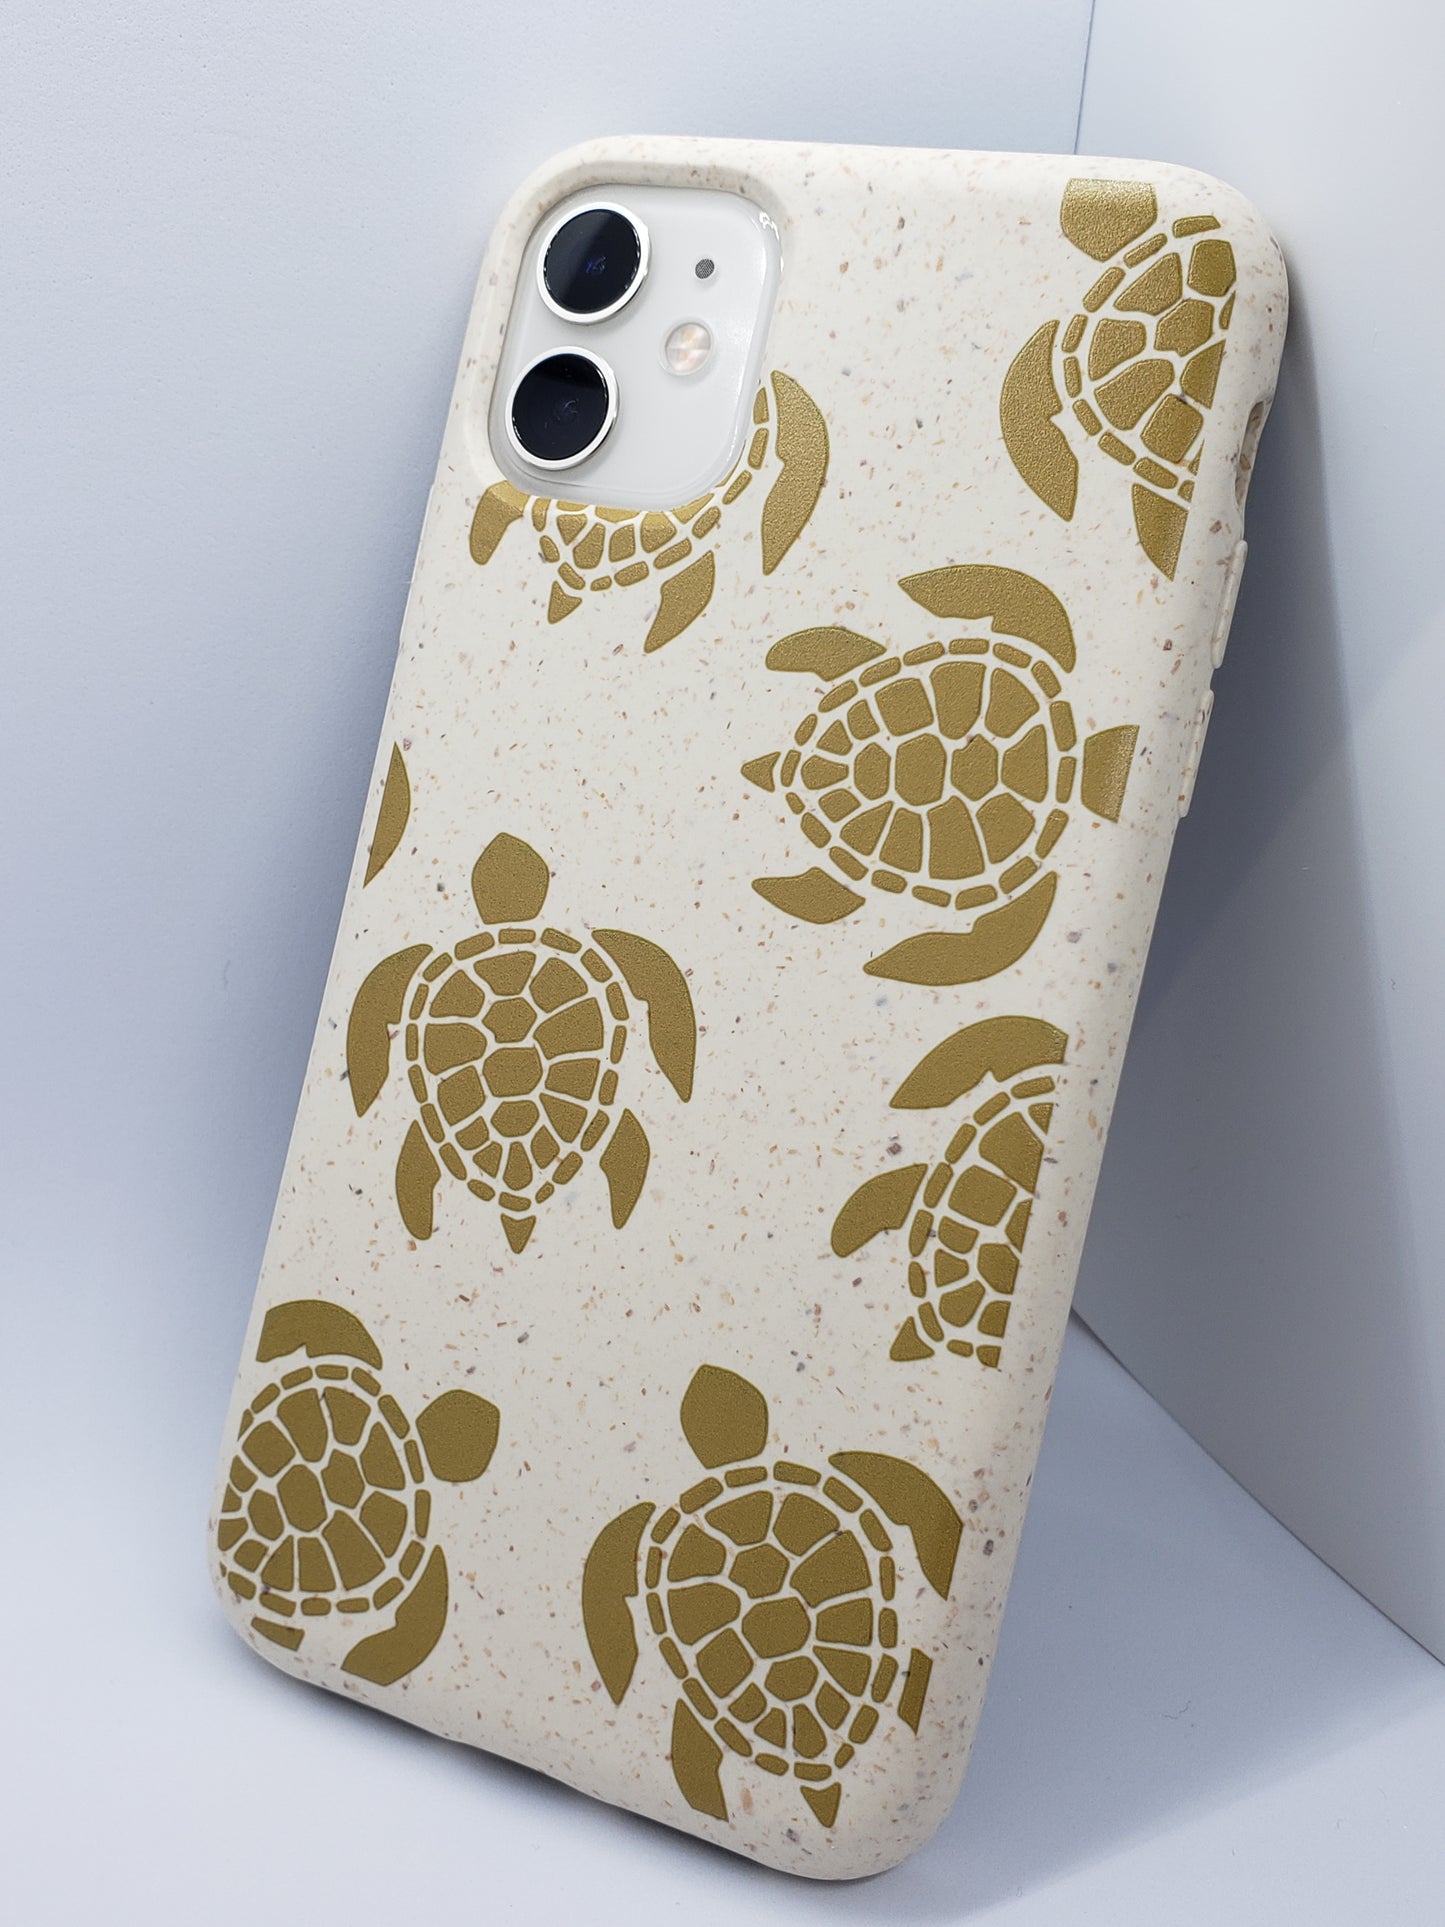 Sea Turtles Biodegradable Compostable iPhone Case